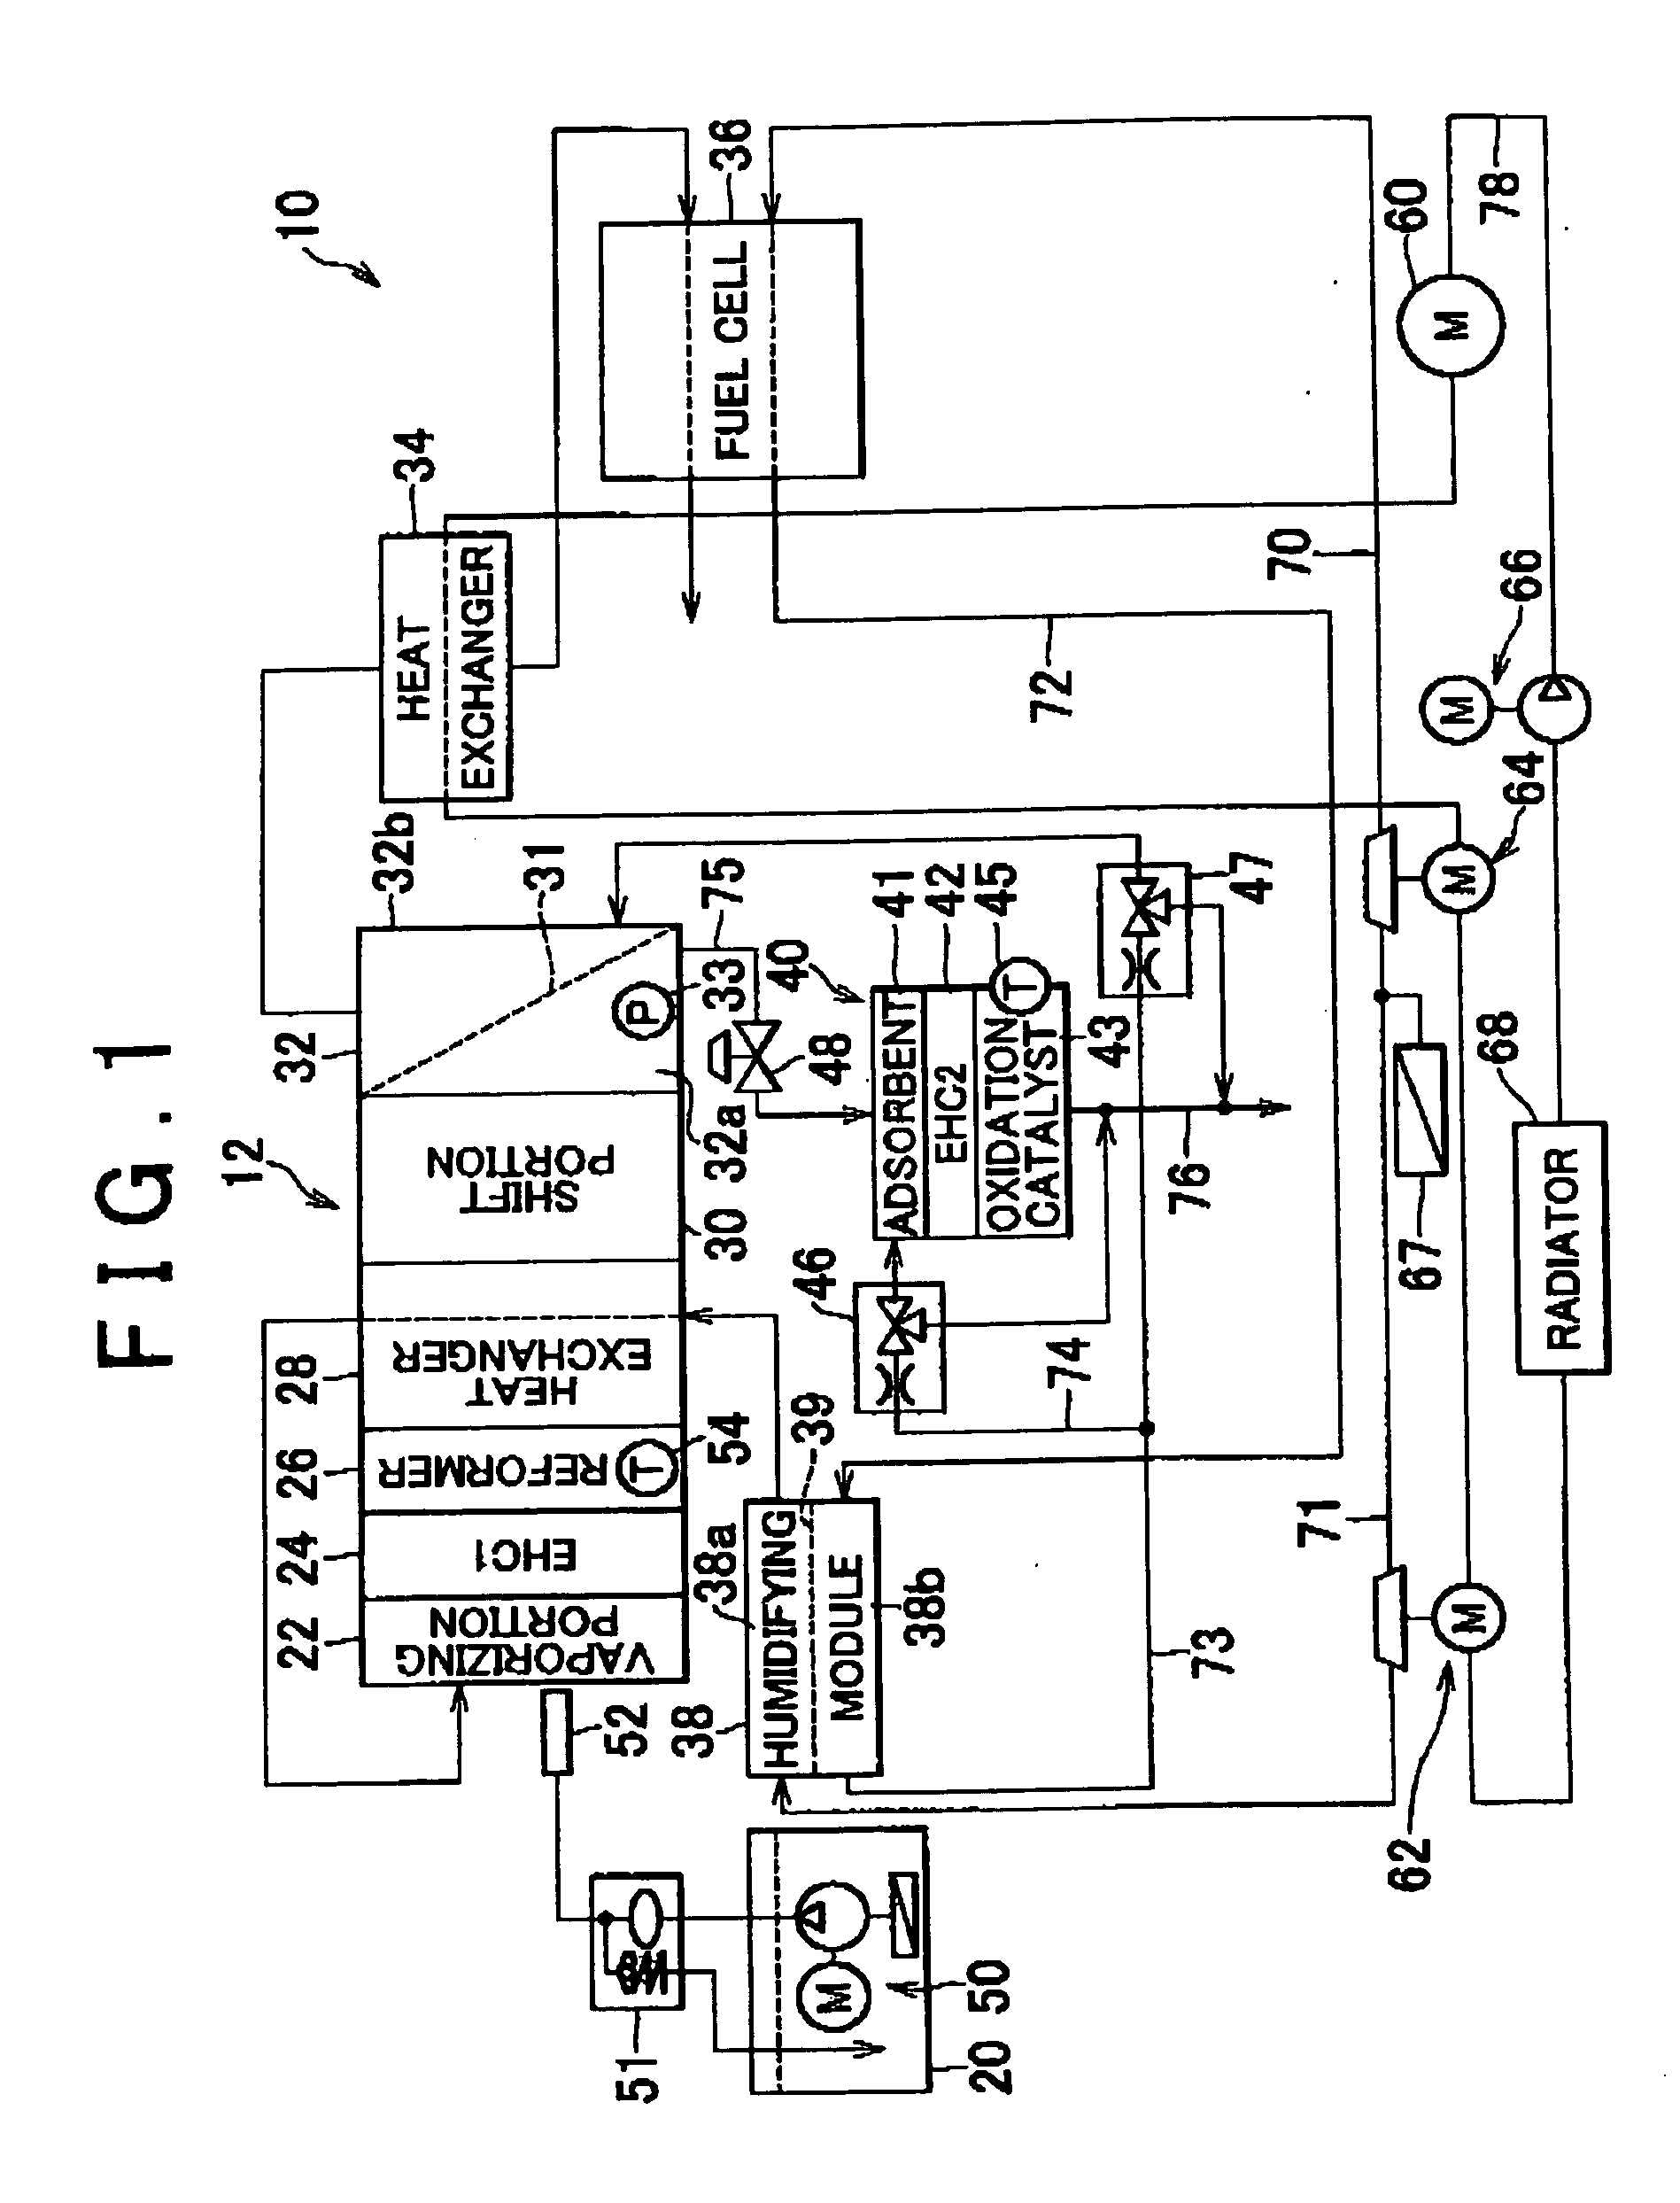 Fuel reforming apparatus and fuel cell system